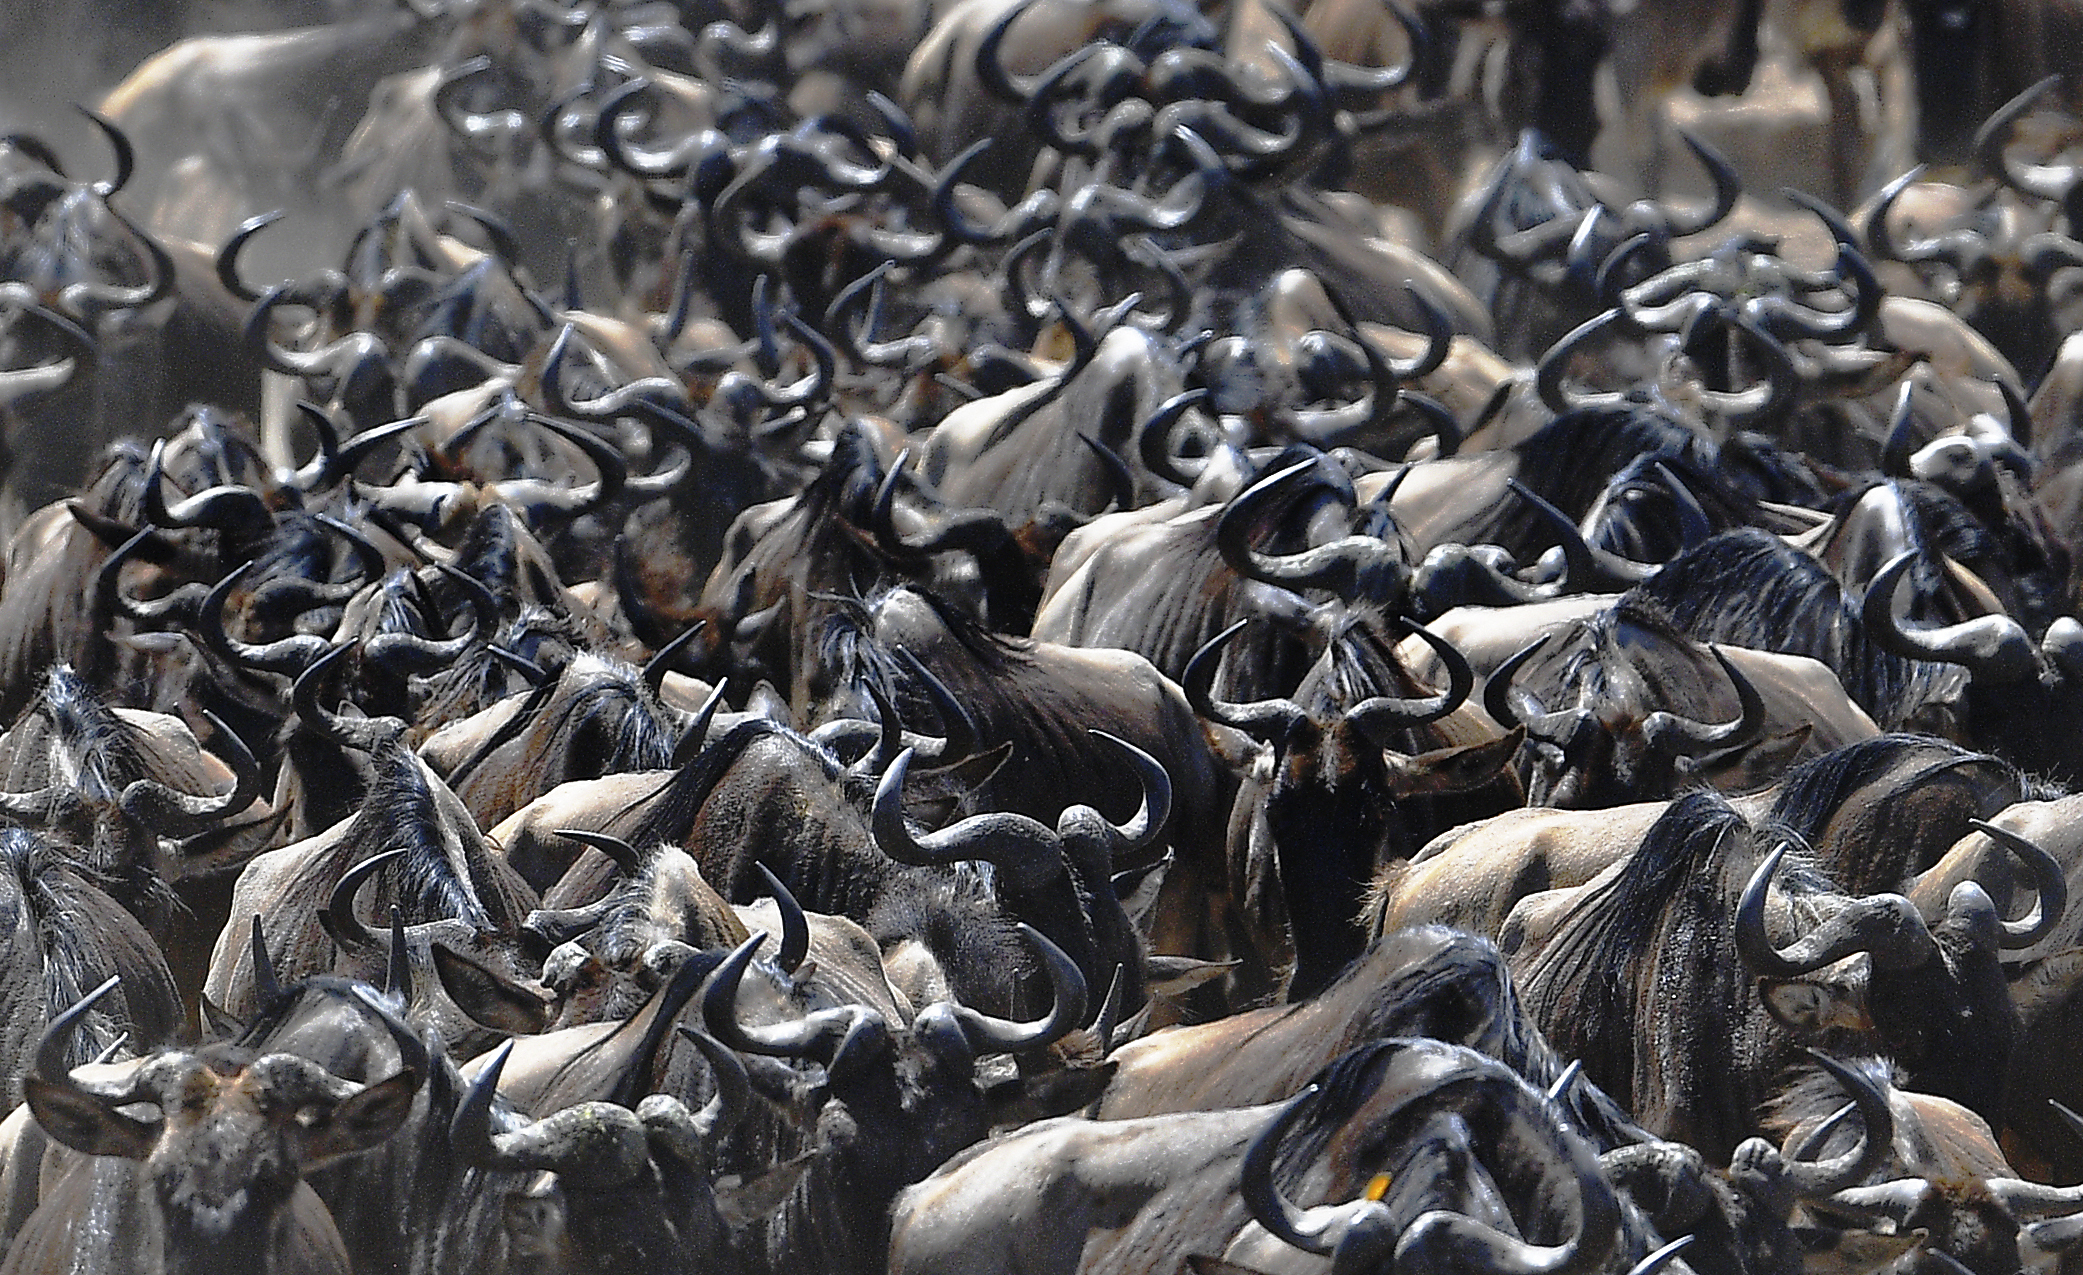 A wildebeest herd is pictured during the annual wildebeest migration on the Maasai Mara National Reserve, Kenya, on Sept. 13, 2016.